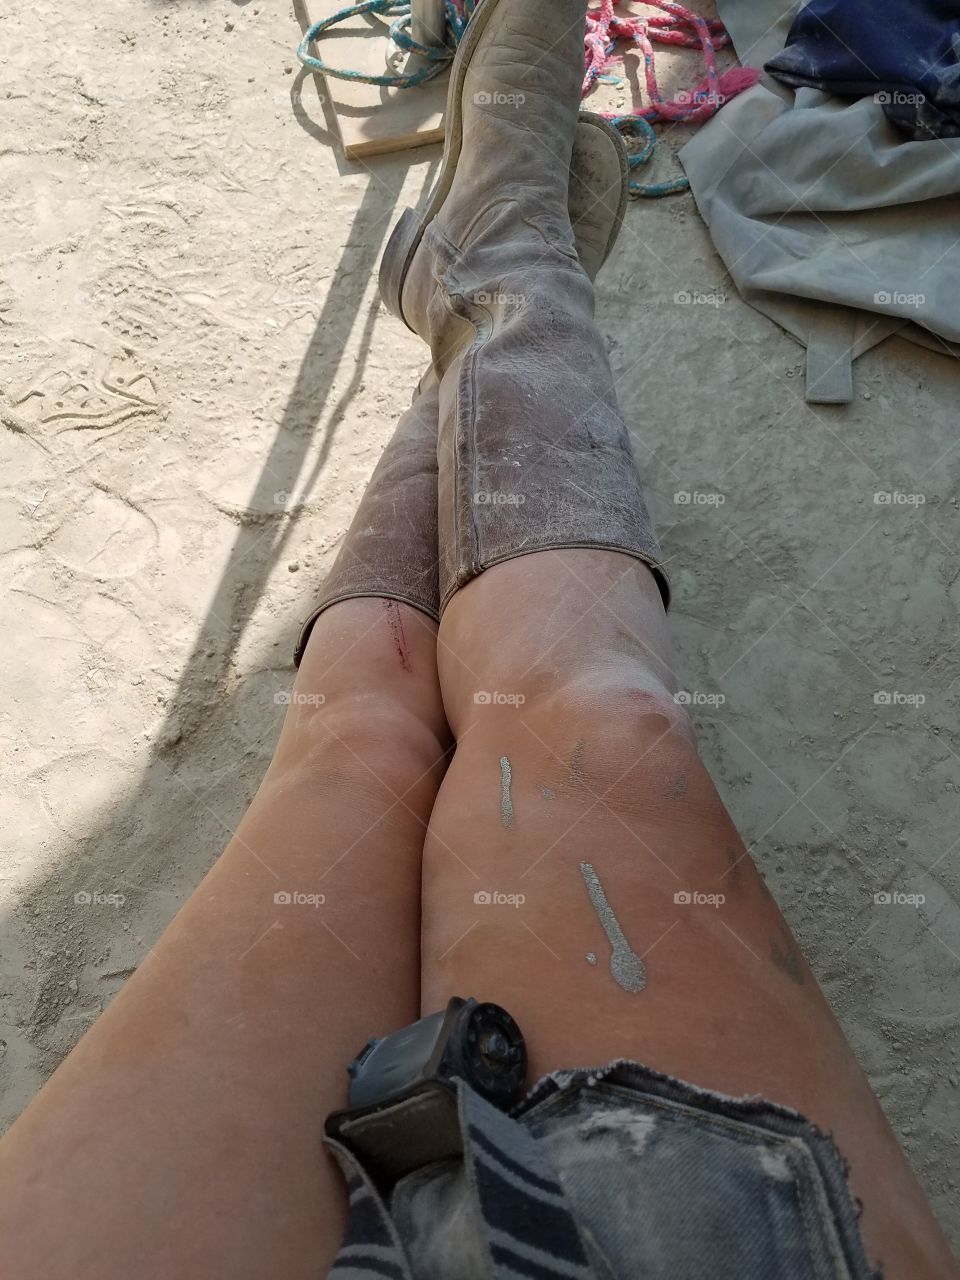 working legs at the end of the dust world